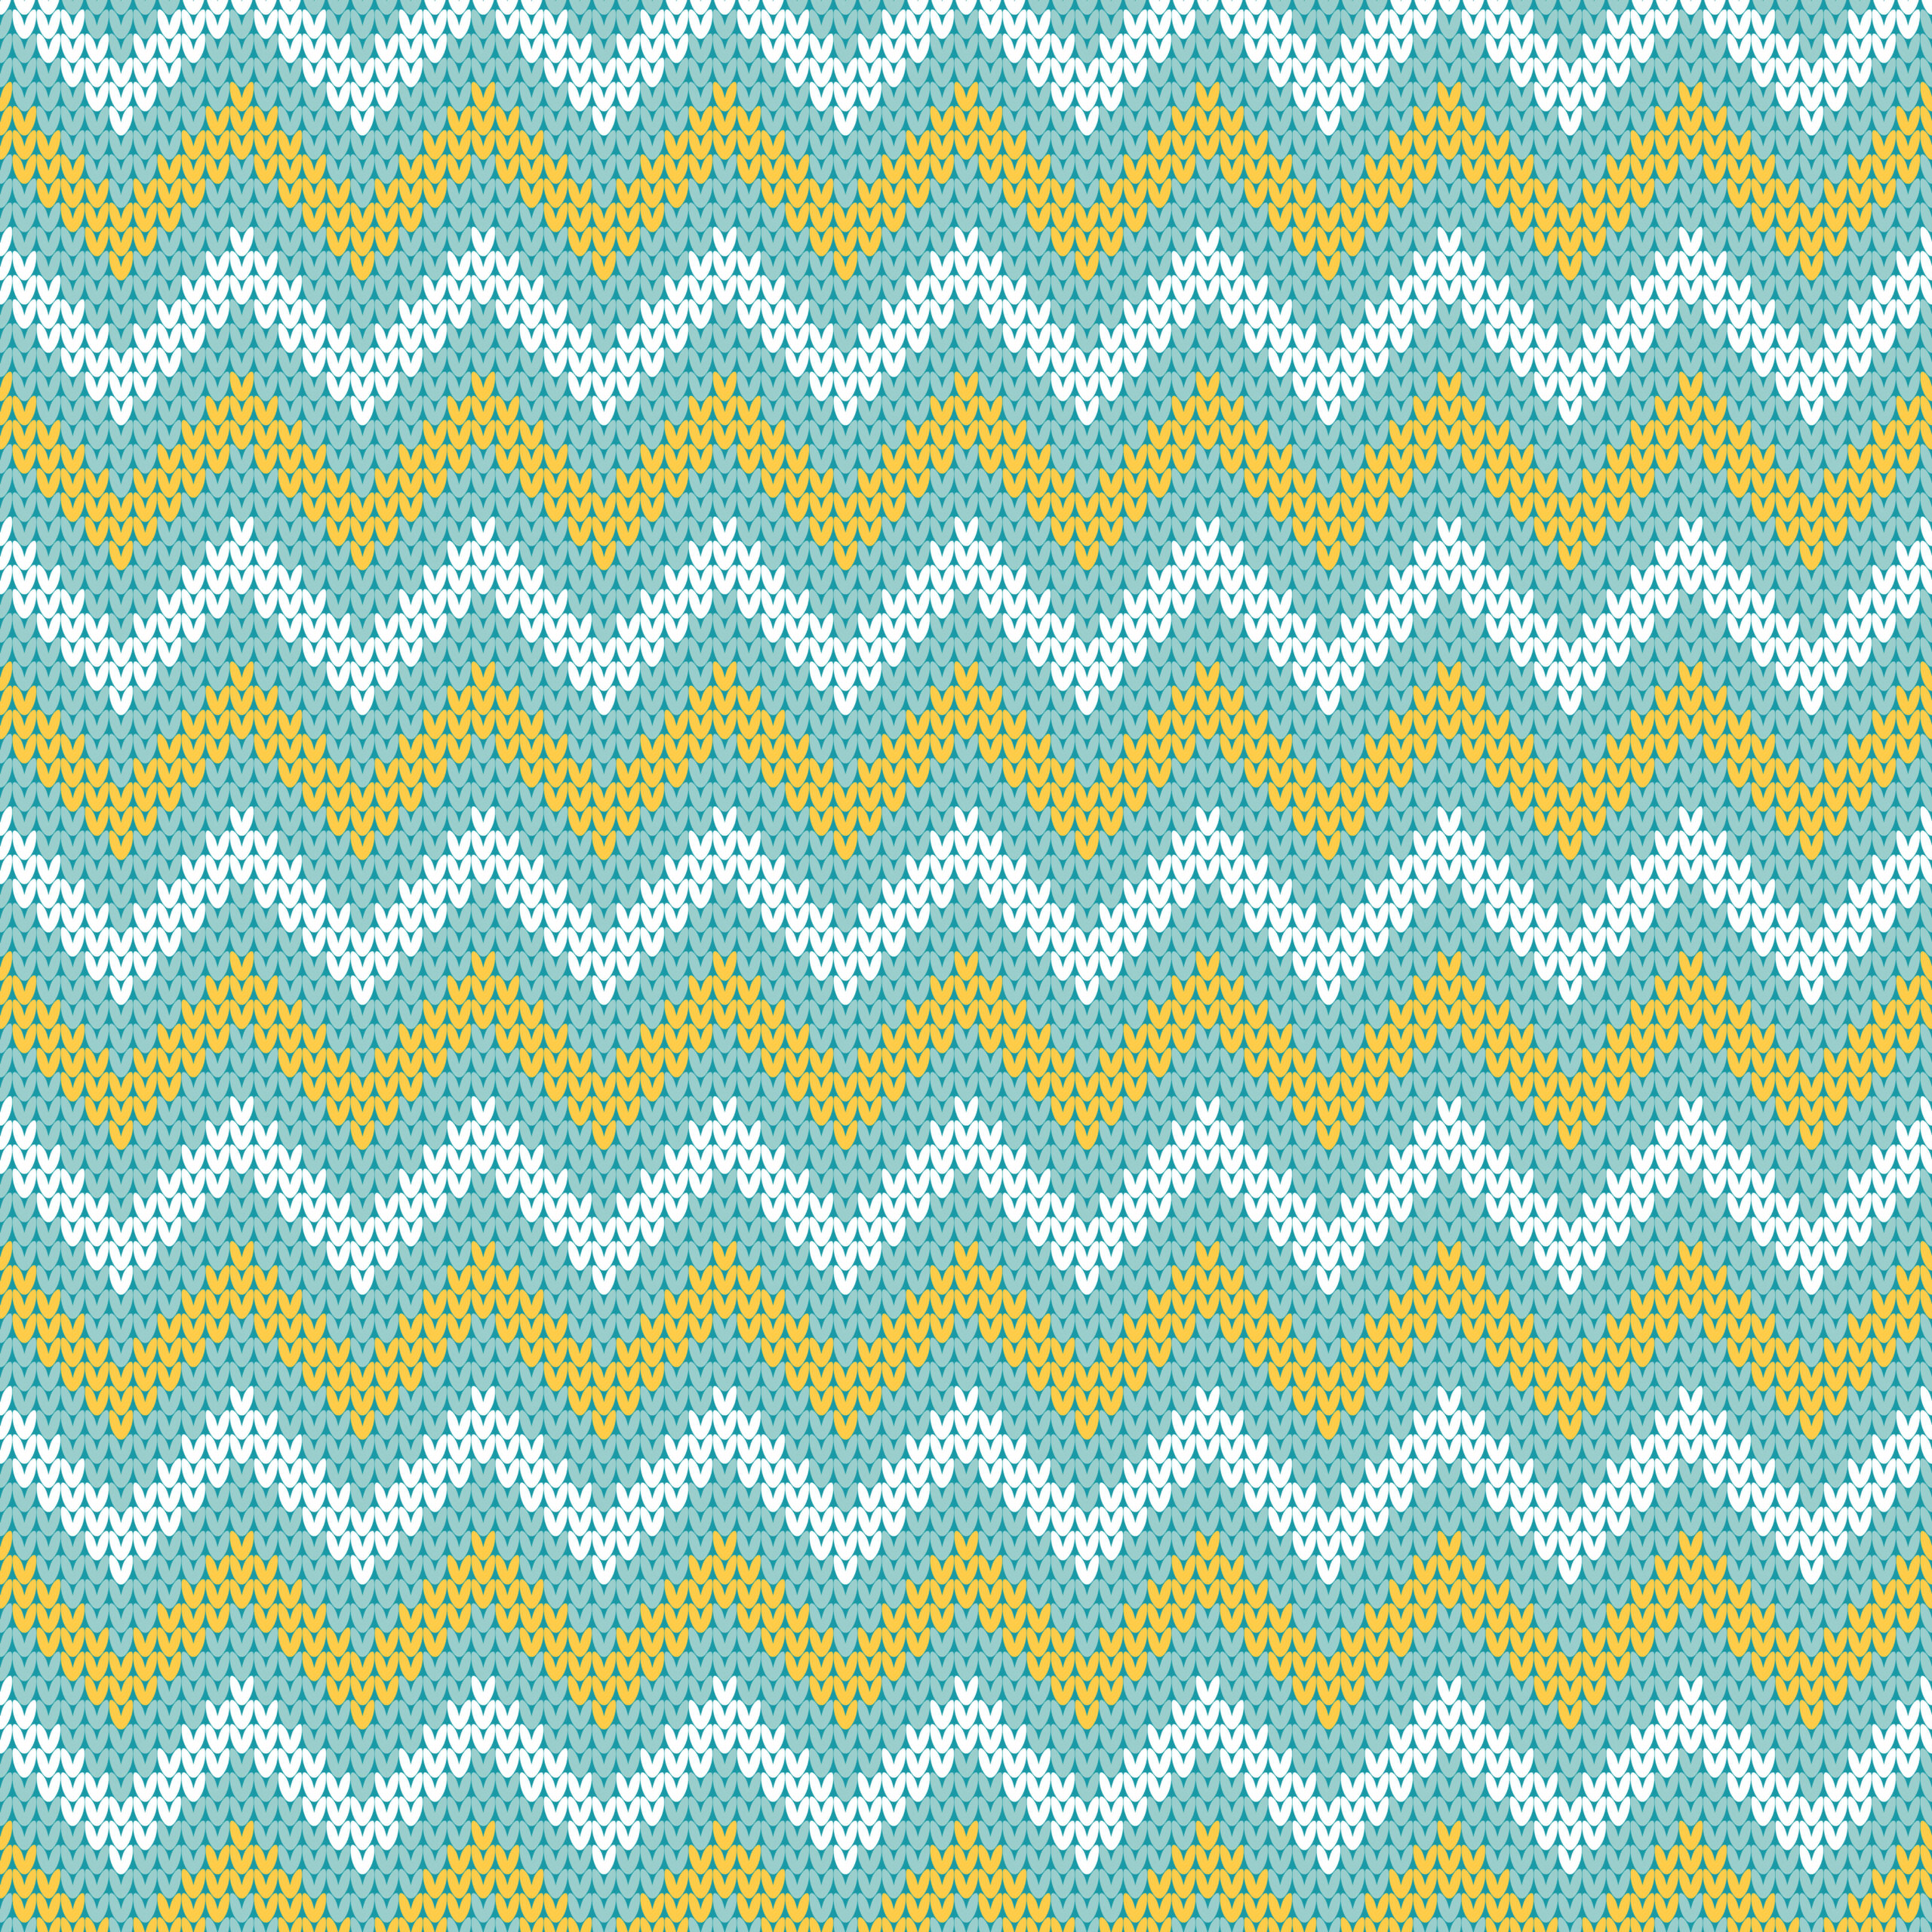 Pastel blue, yellow and white knitted sweater chevron stripes seamless pattern. Classic winter pattern with white and yellow stripes on blue background. Knitted texture zig zag backdrop.